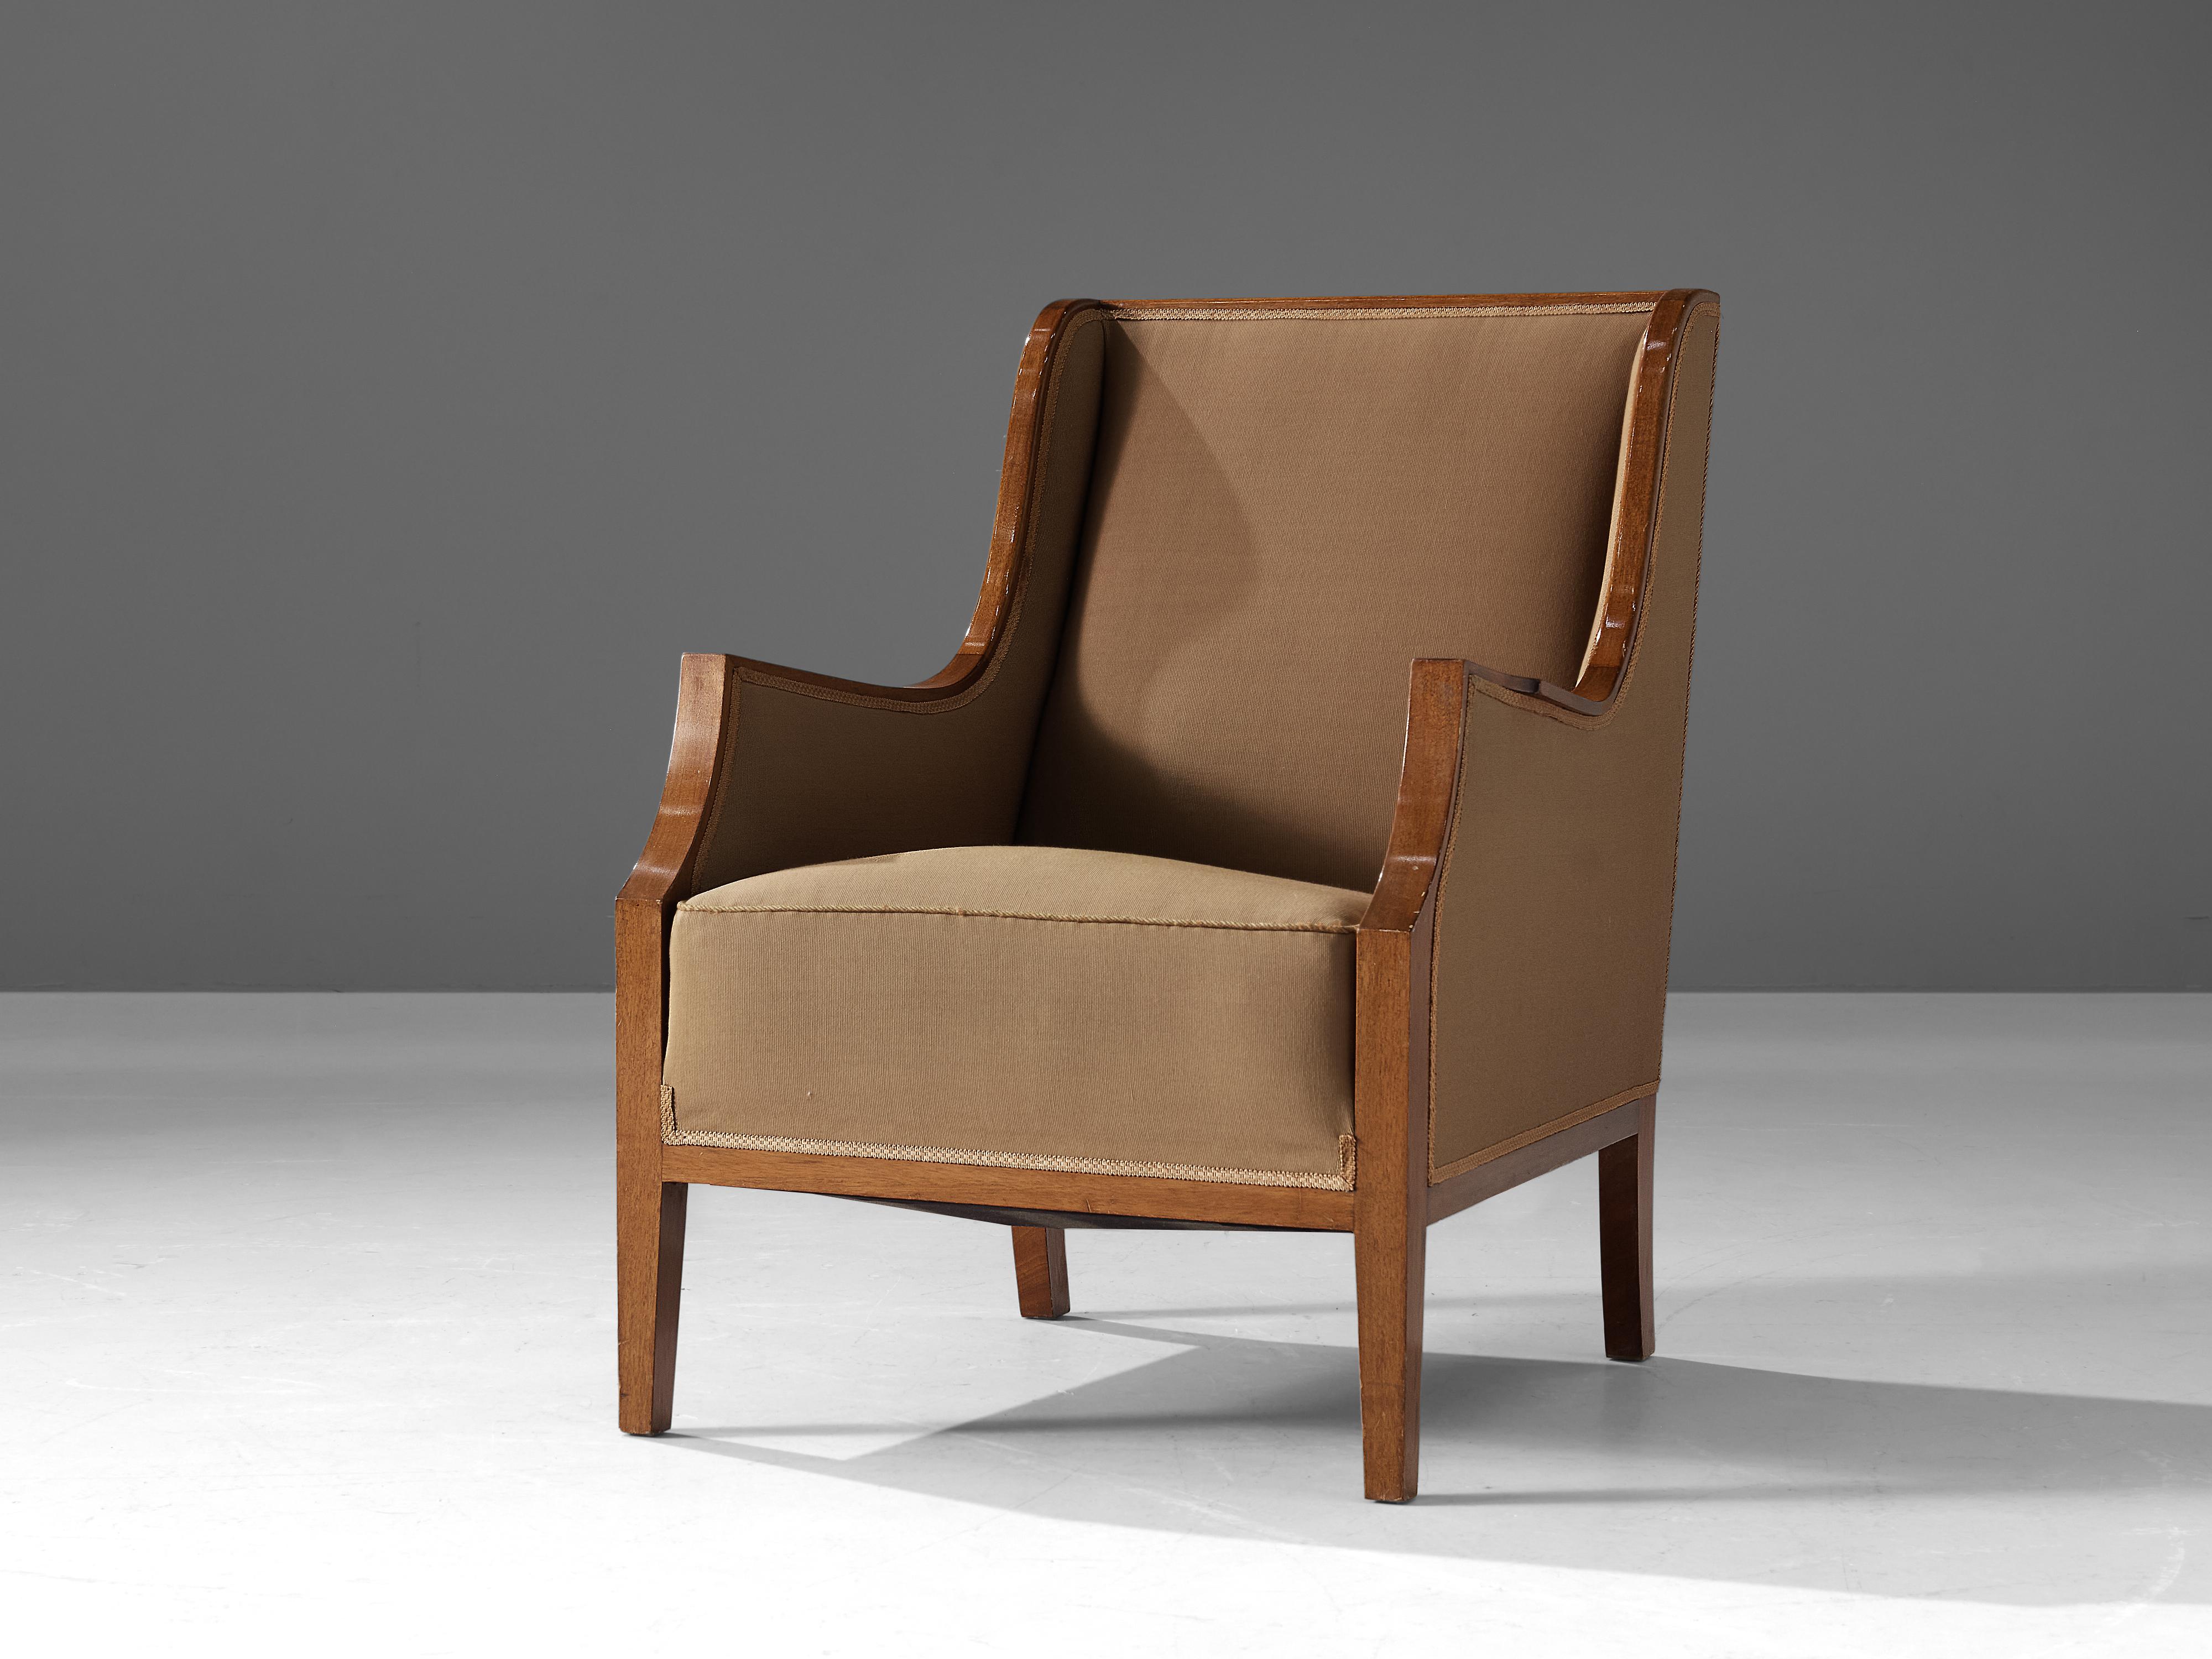 Lounge chair, fabric, mahogany, Scandinavia, 1960s

Sturdy lounge chairs in brown fabric. This chair has an inviting, comfortable look while still being stylish. The very well-crafted wooden legs fit perfectly with the brown fabric, giving it a